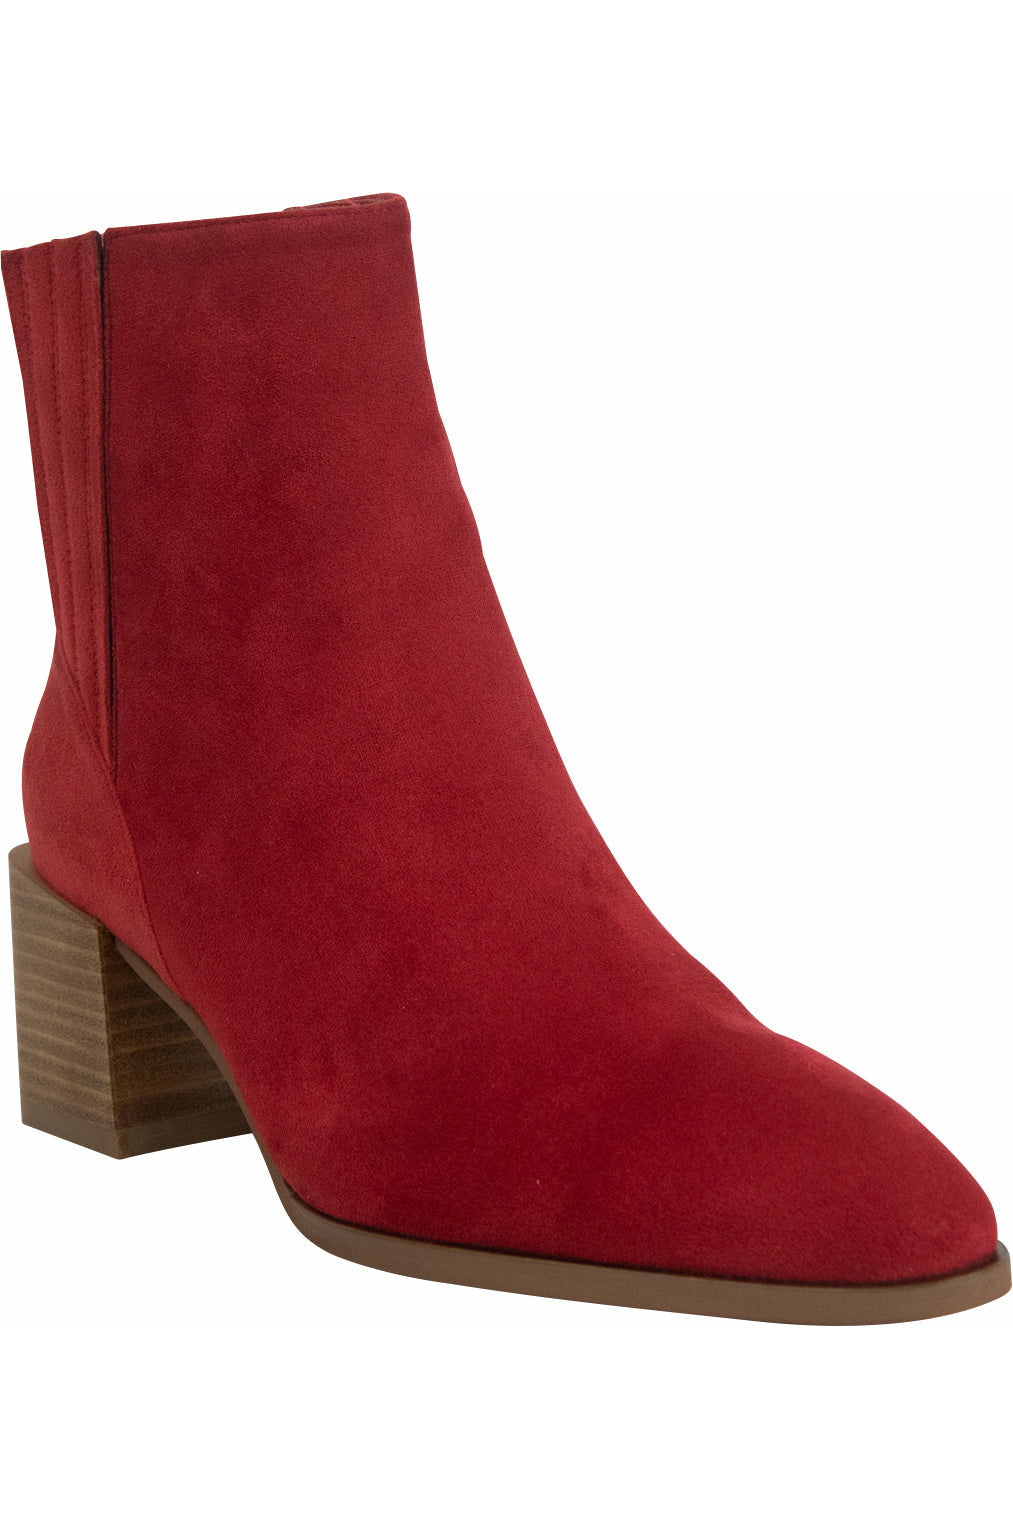 Isabella Paris Suede Ankle boot in Red